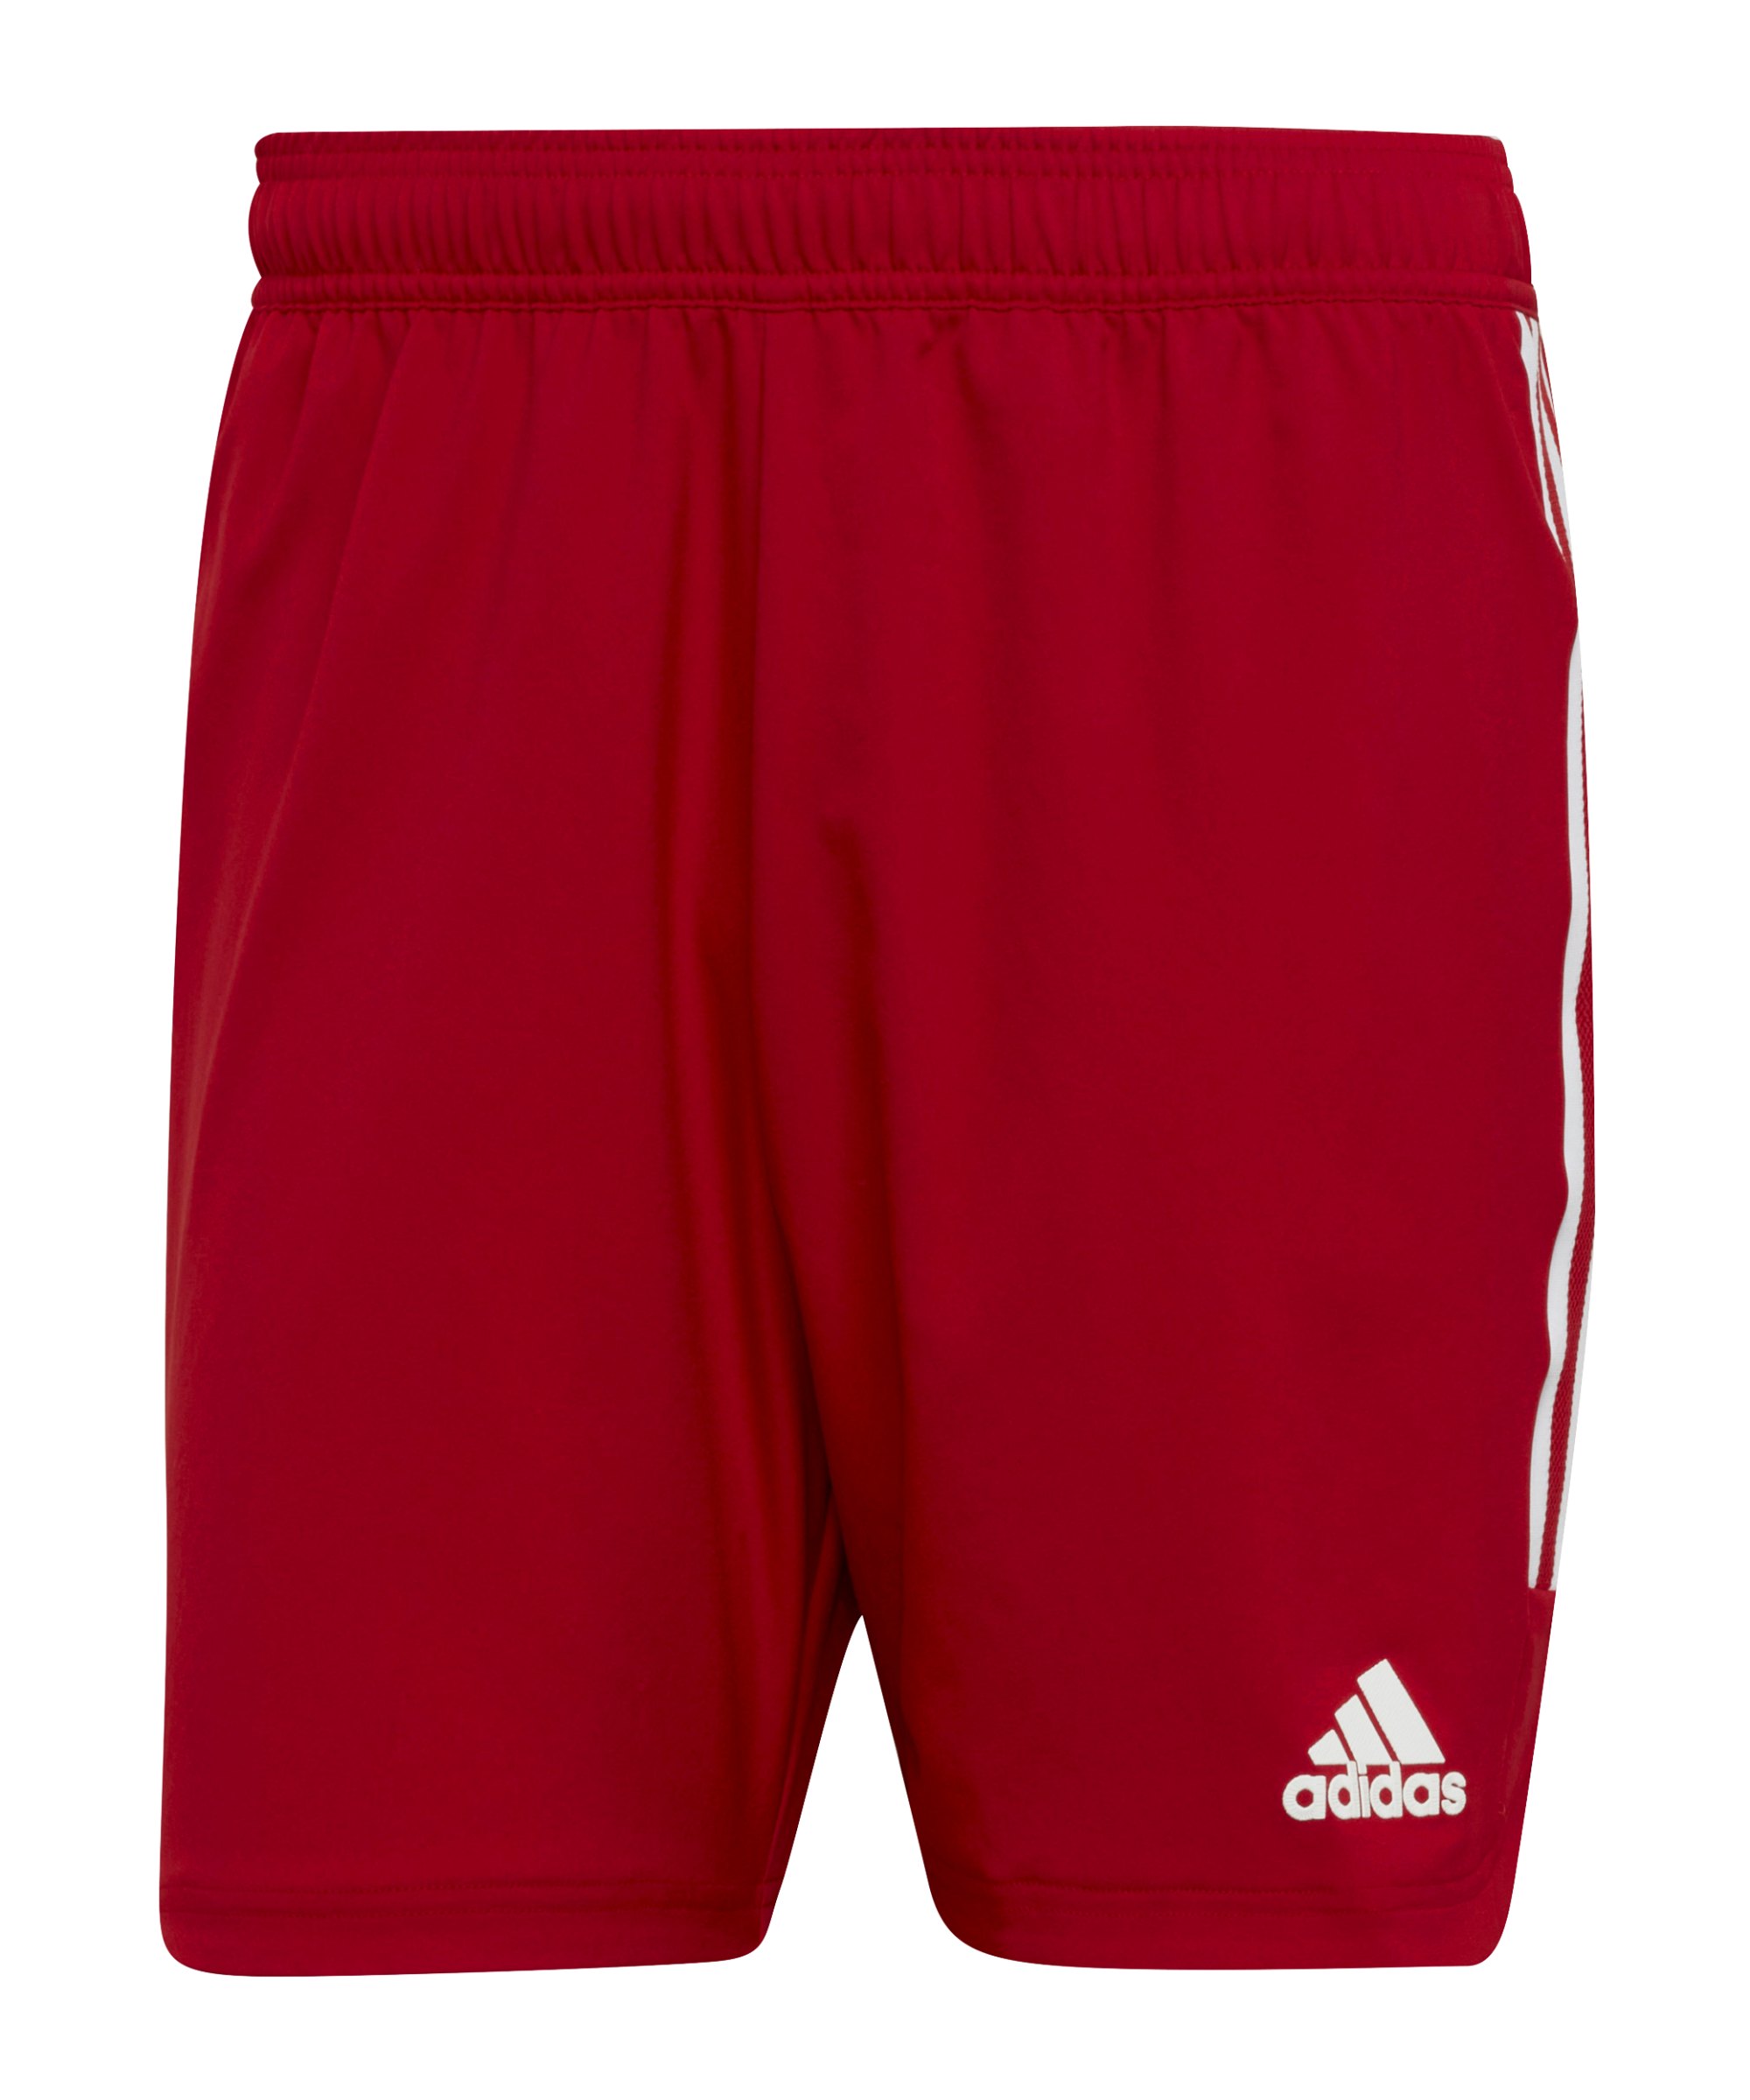 adidas Condivo 22 MD Short Rot Weiss - rot